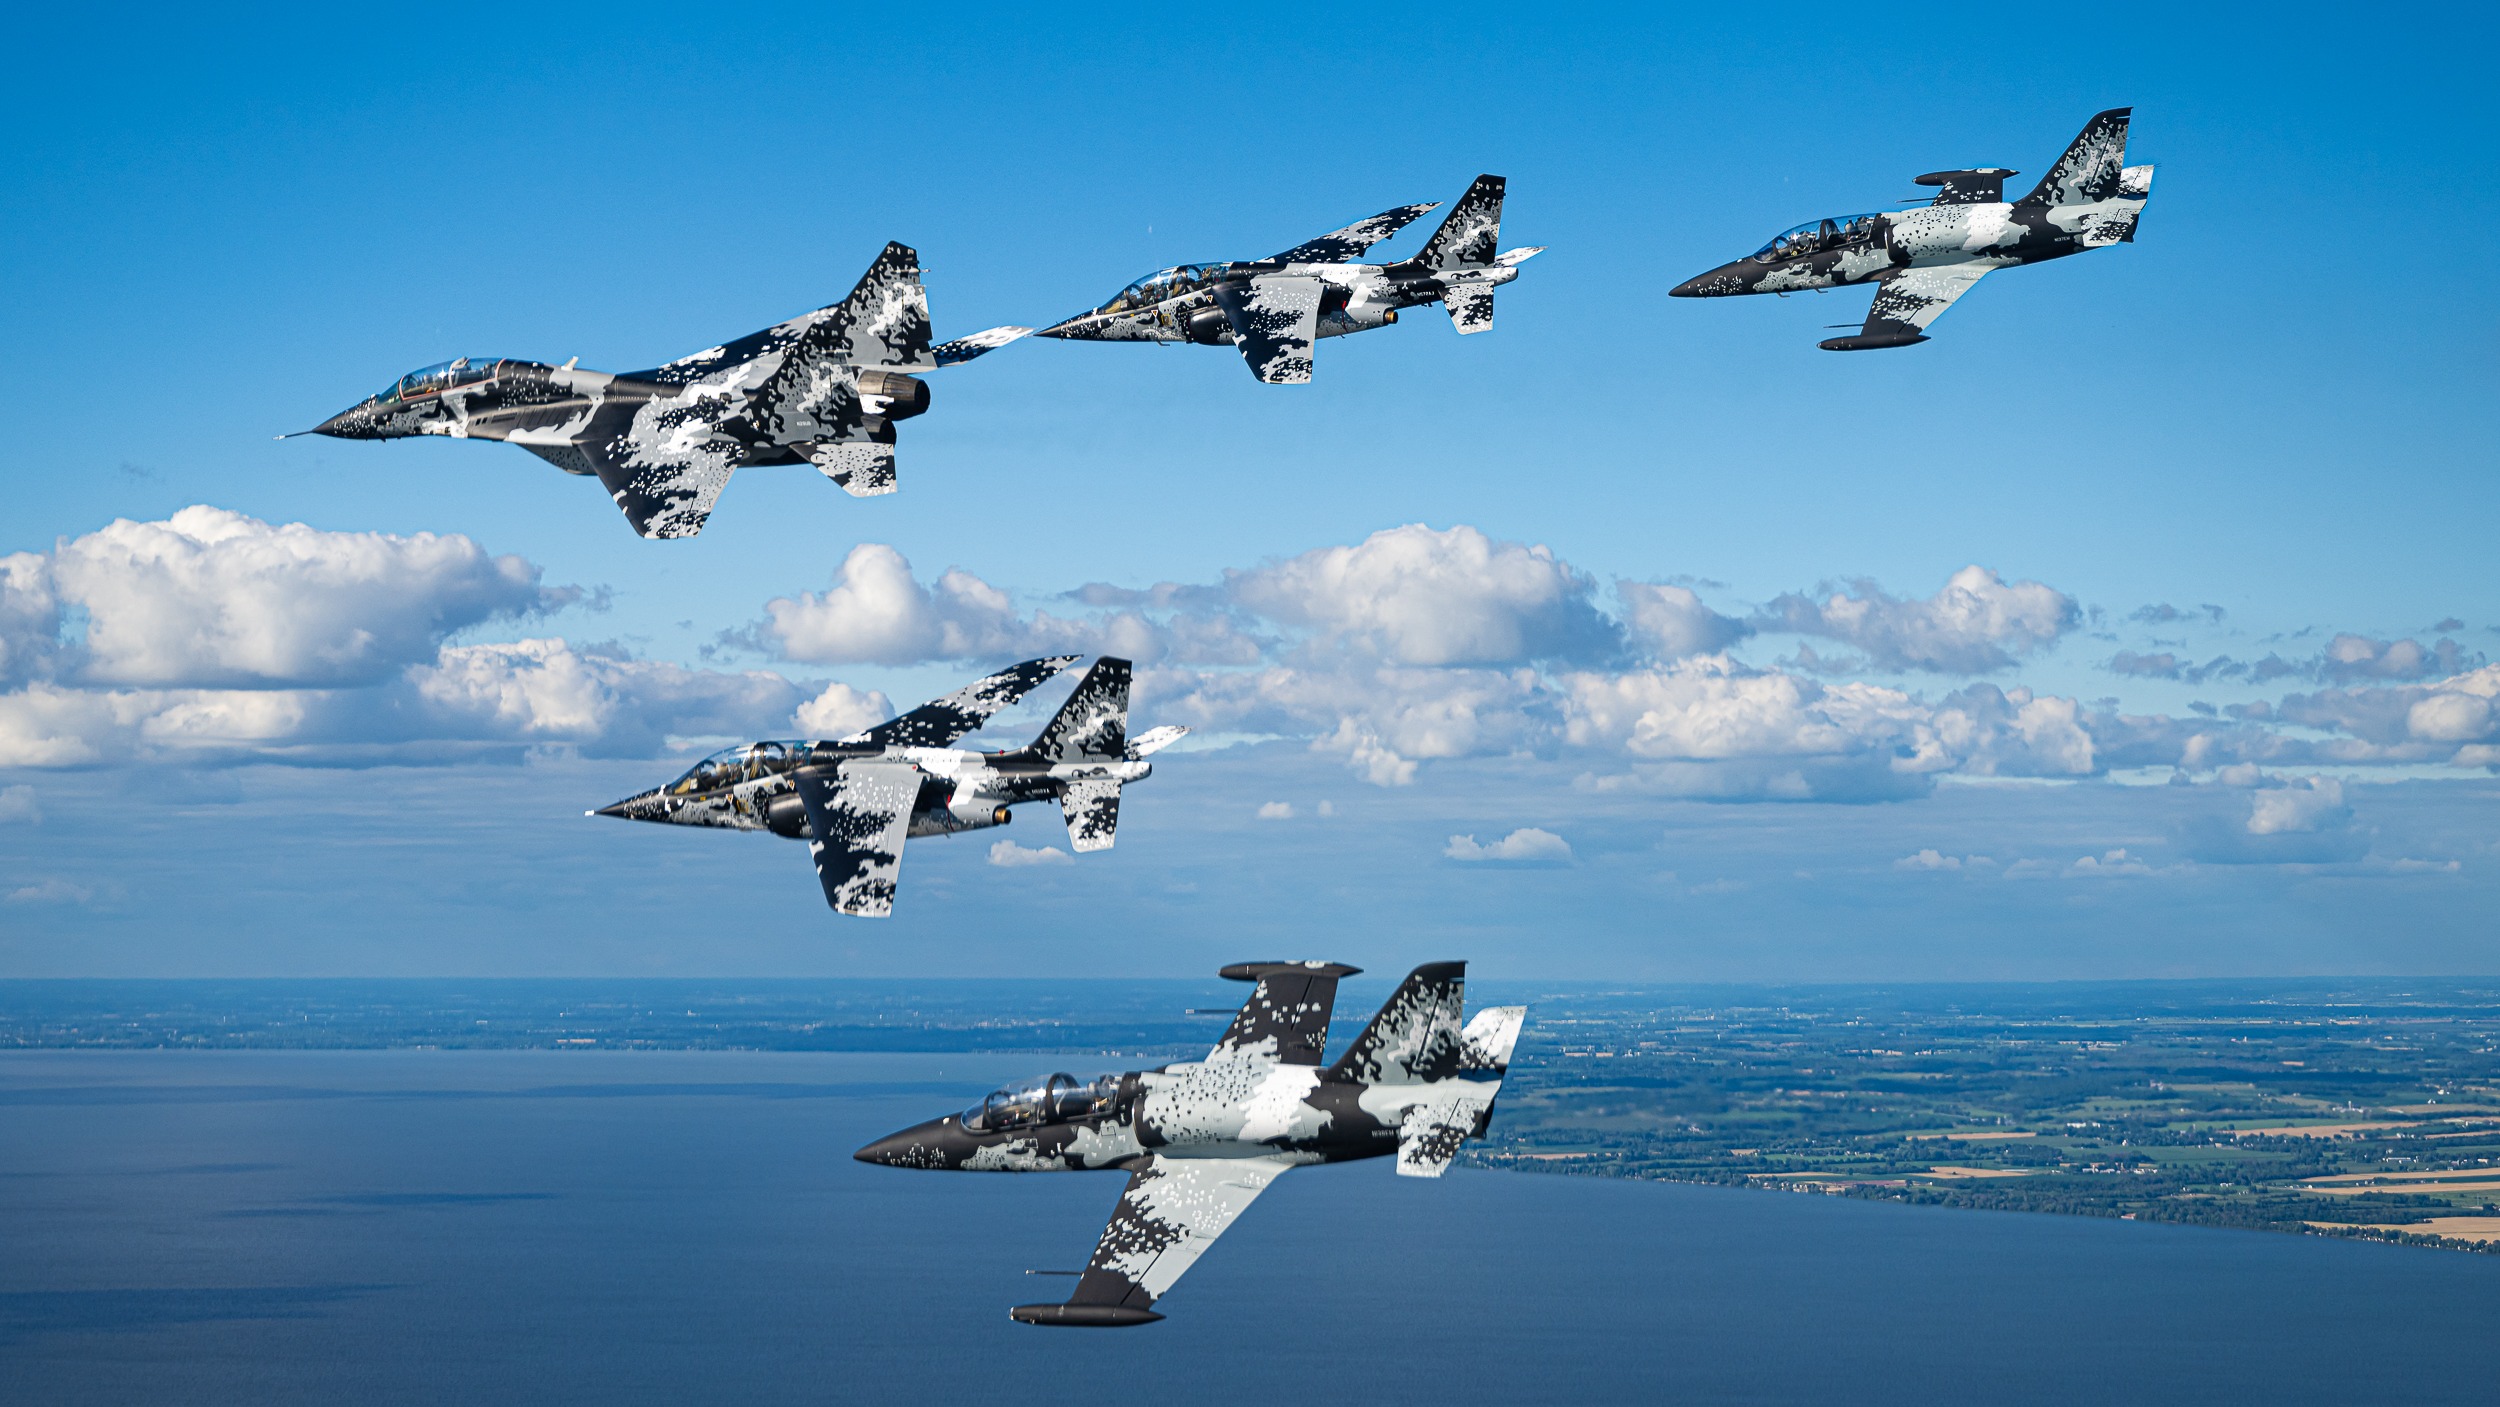 five Mikoyan MiG-29 aircraft fly in a triangle/arrow formation.